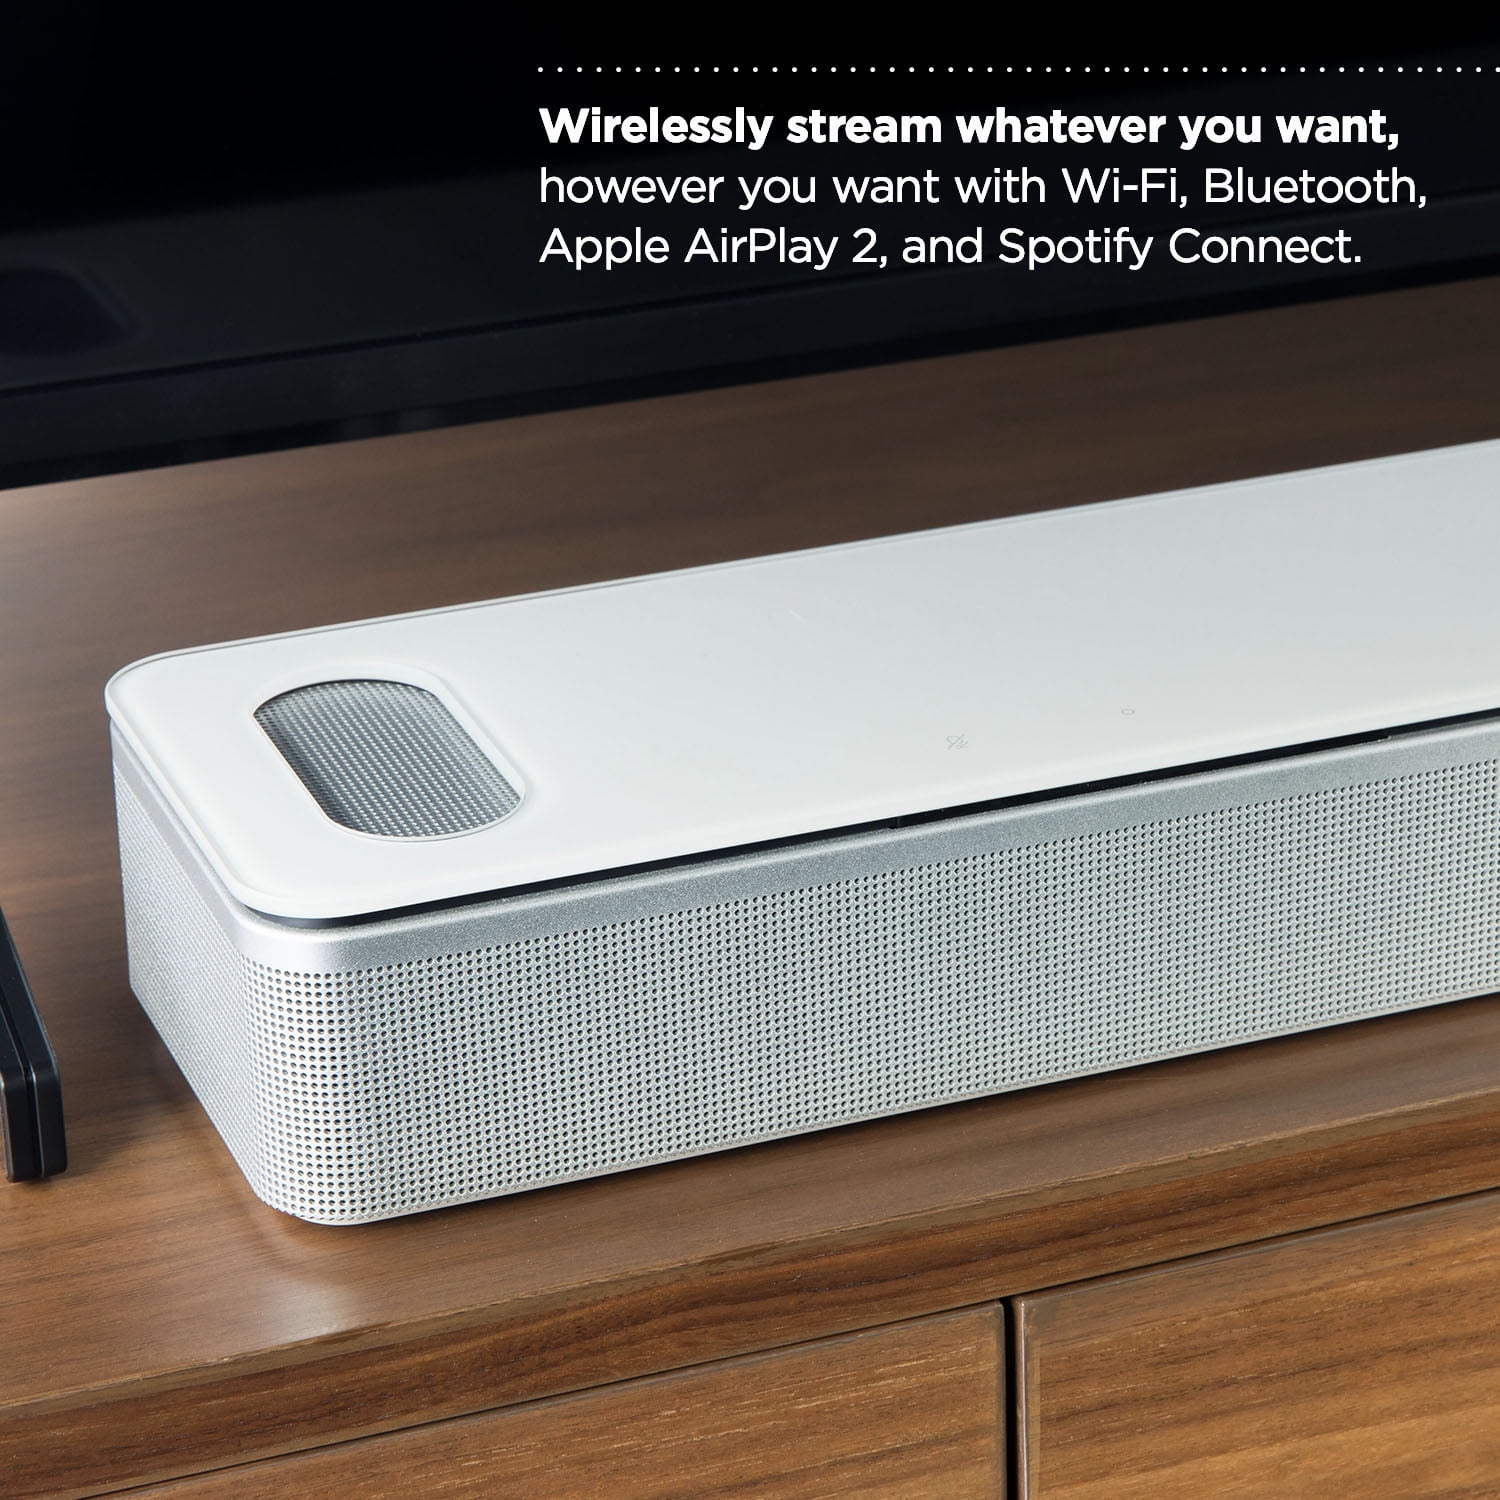 Bose Smart Soundbar 900 review: Great features, great performance, high  price - CNET